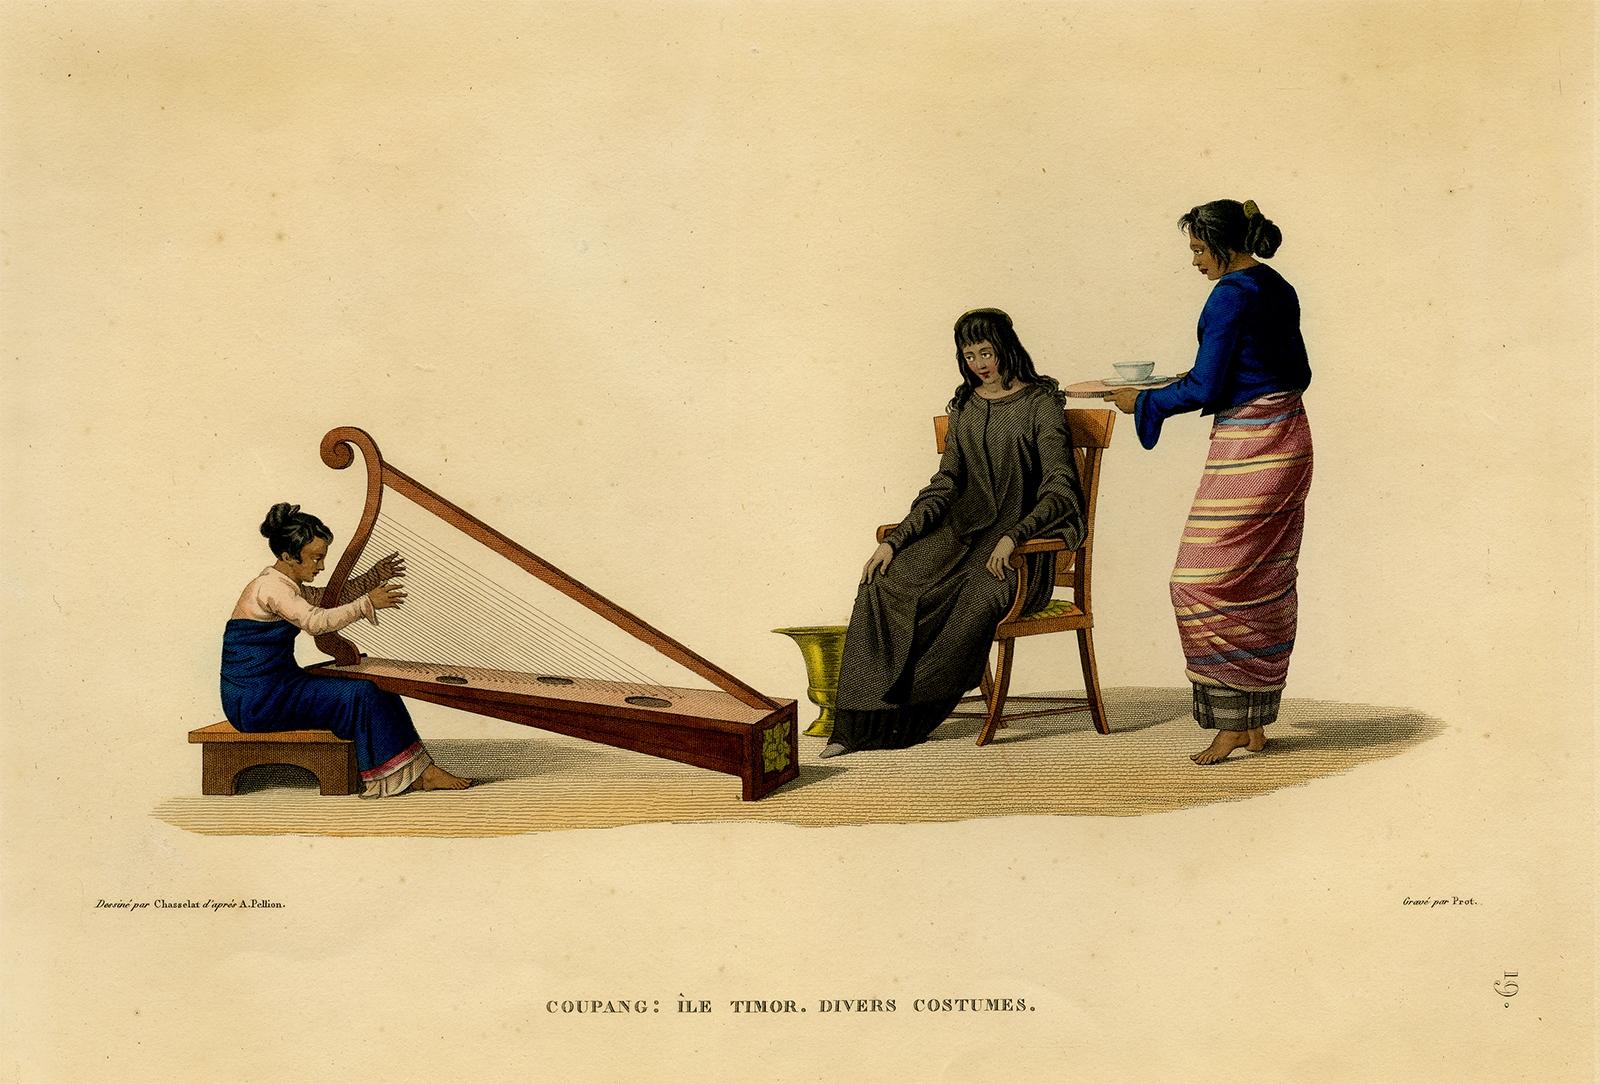 Antique print, titled: 'Coupang: Ile Timor. Divers Costumes.' - ('Coupang, Timor Island. Various costumes'). 

Three figures in the native dress of the Indonesian island Timor. A young woman plays a harp-like instrument while another brings a bowl